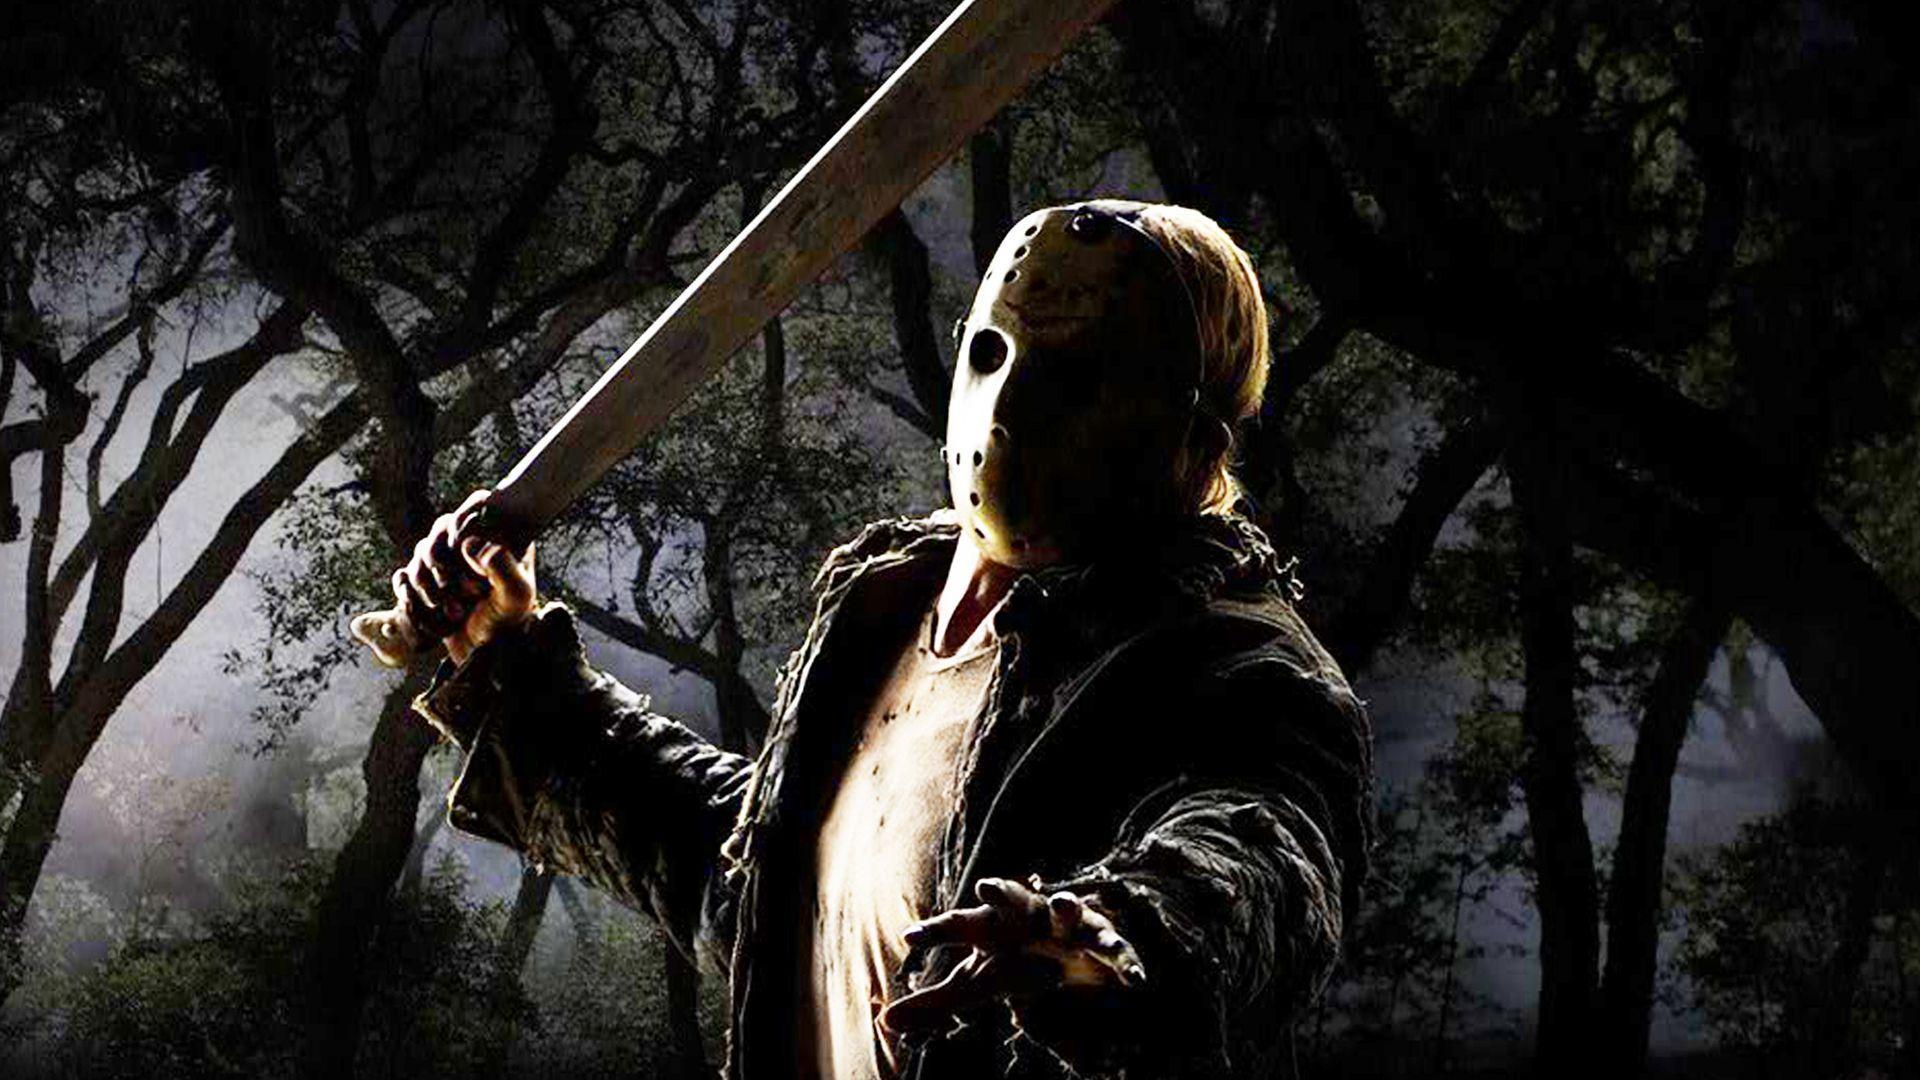 Wallpaper of Friday the 13th